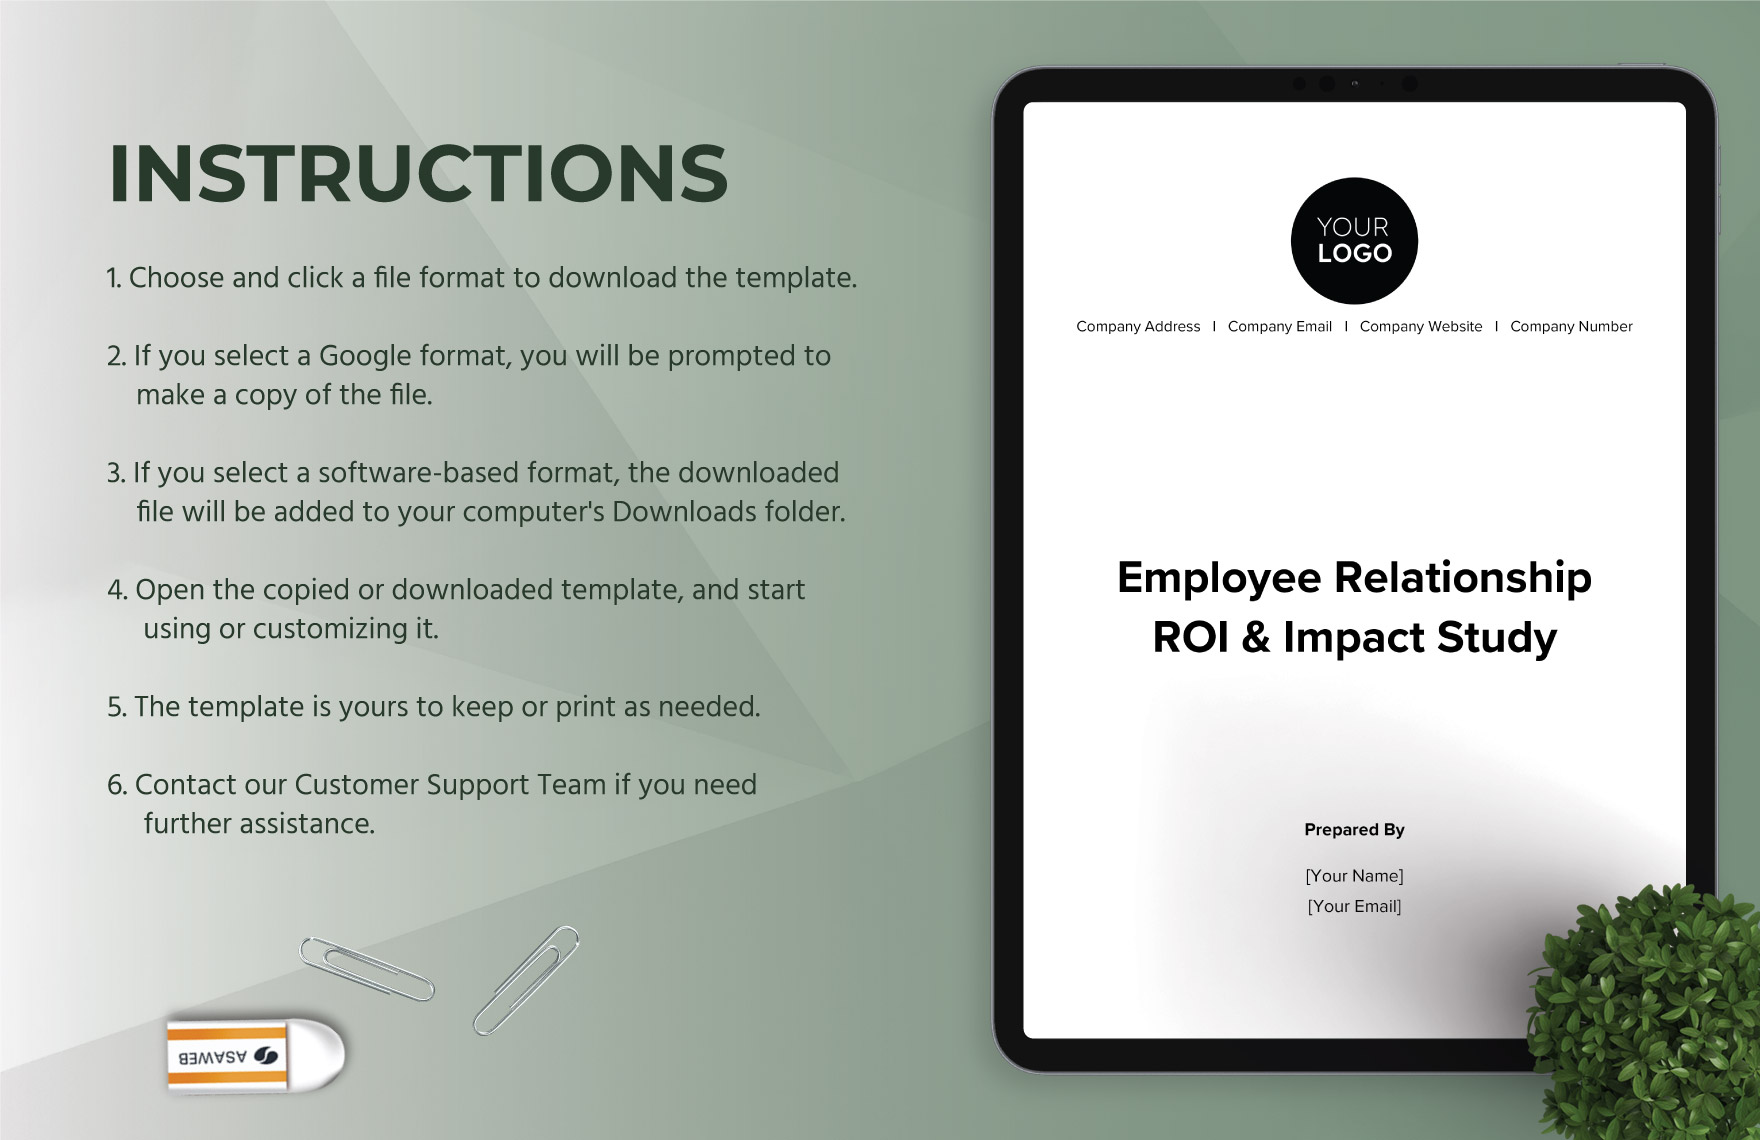 Employee Relationship ROI & Impact Study HR Template